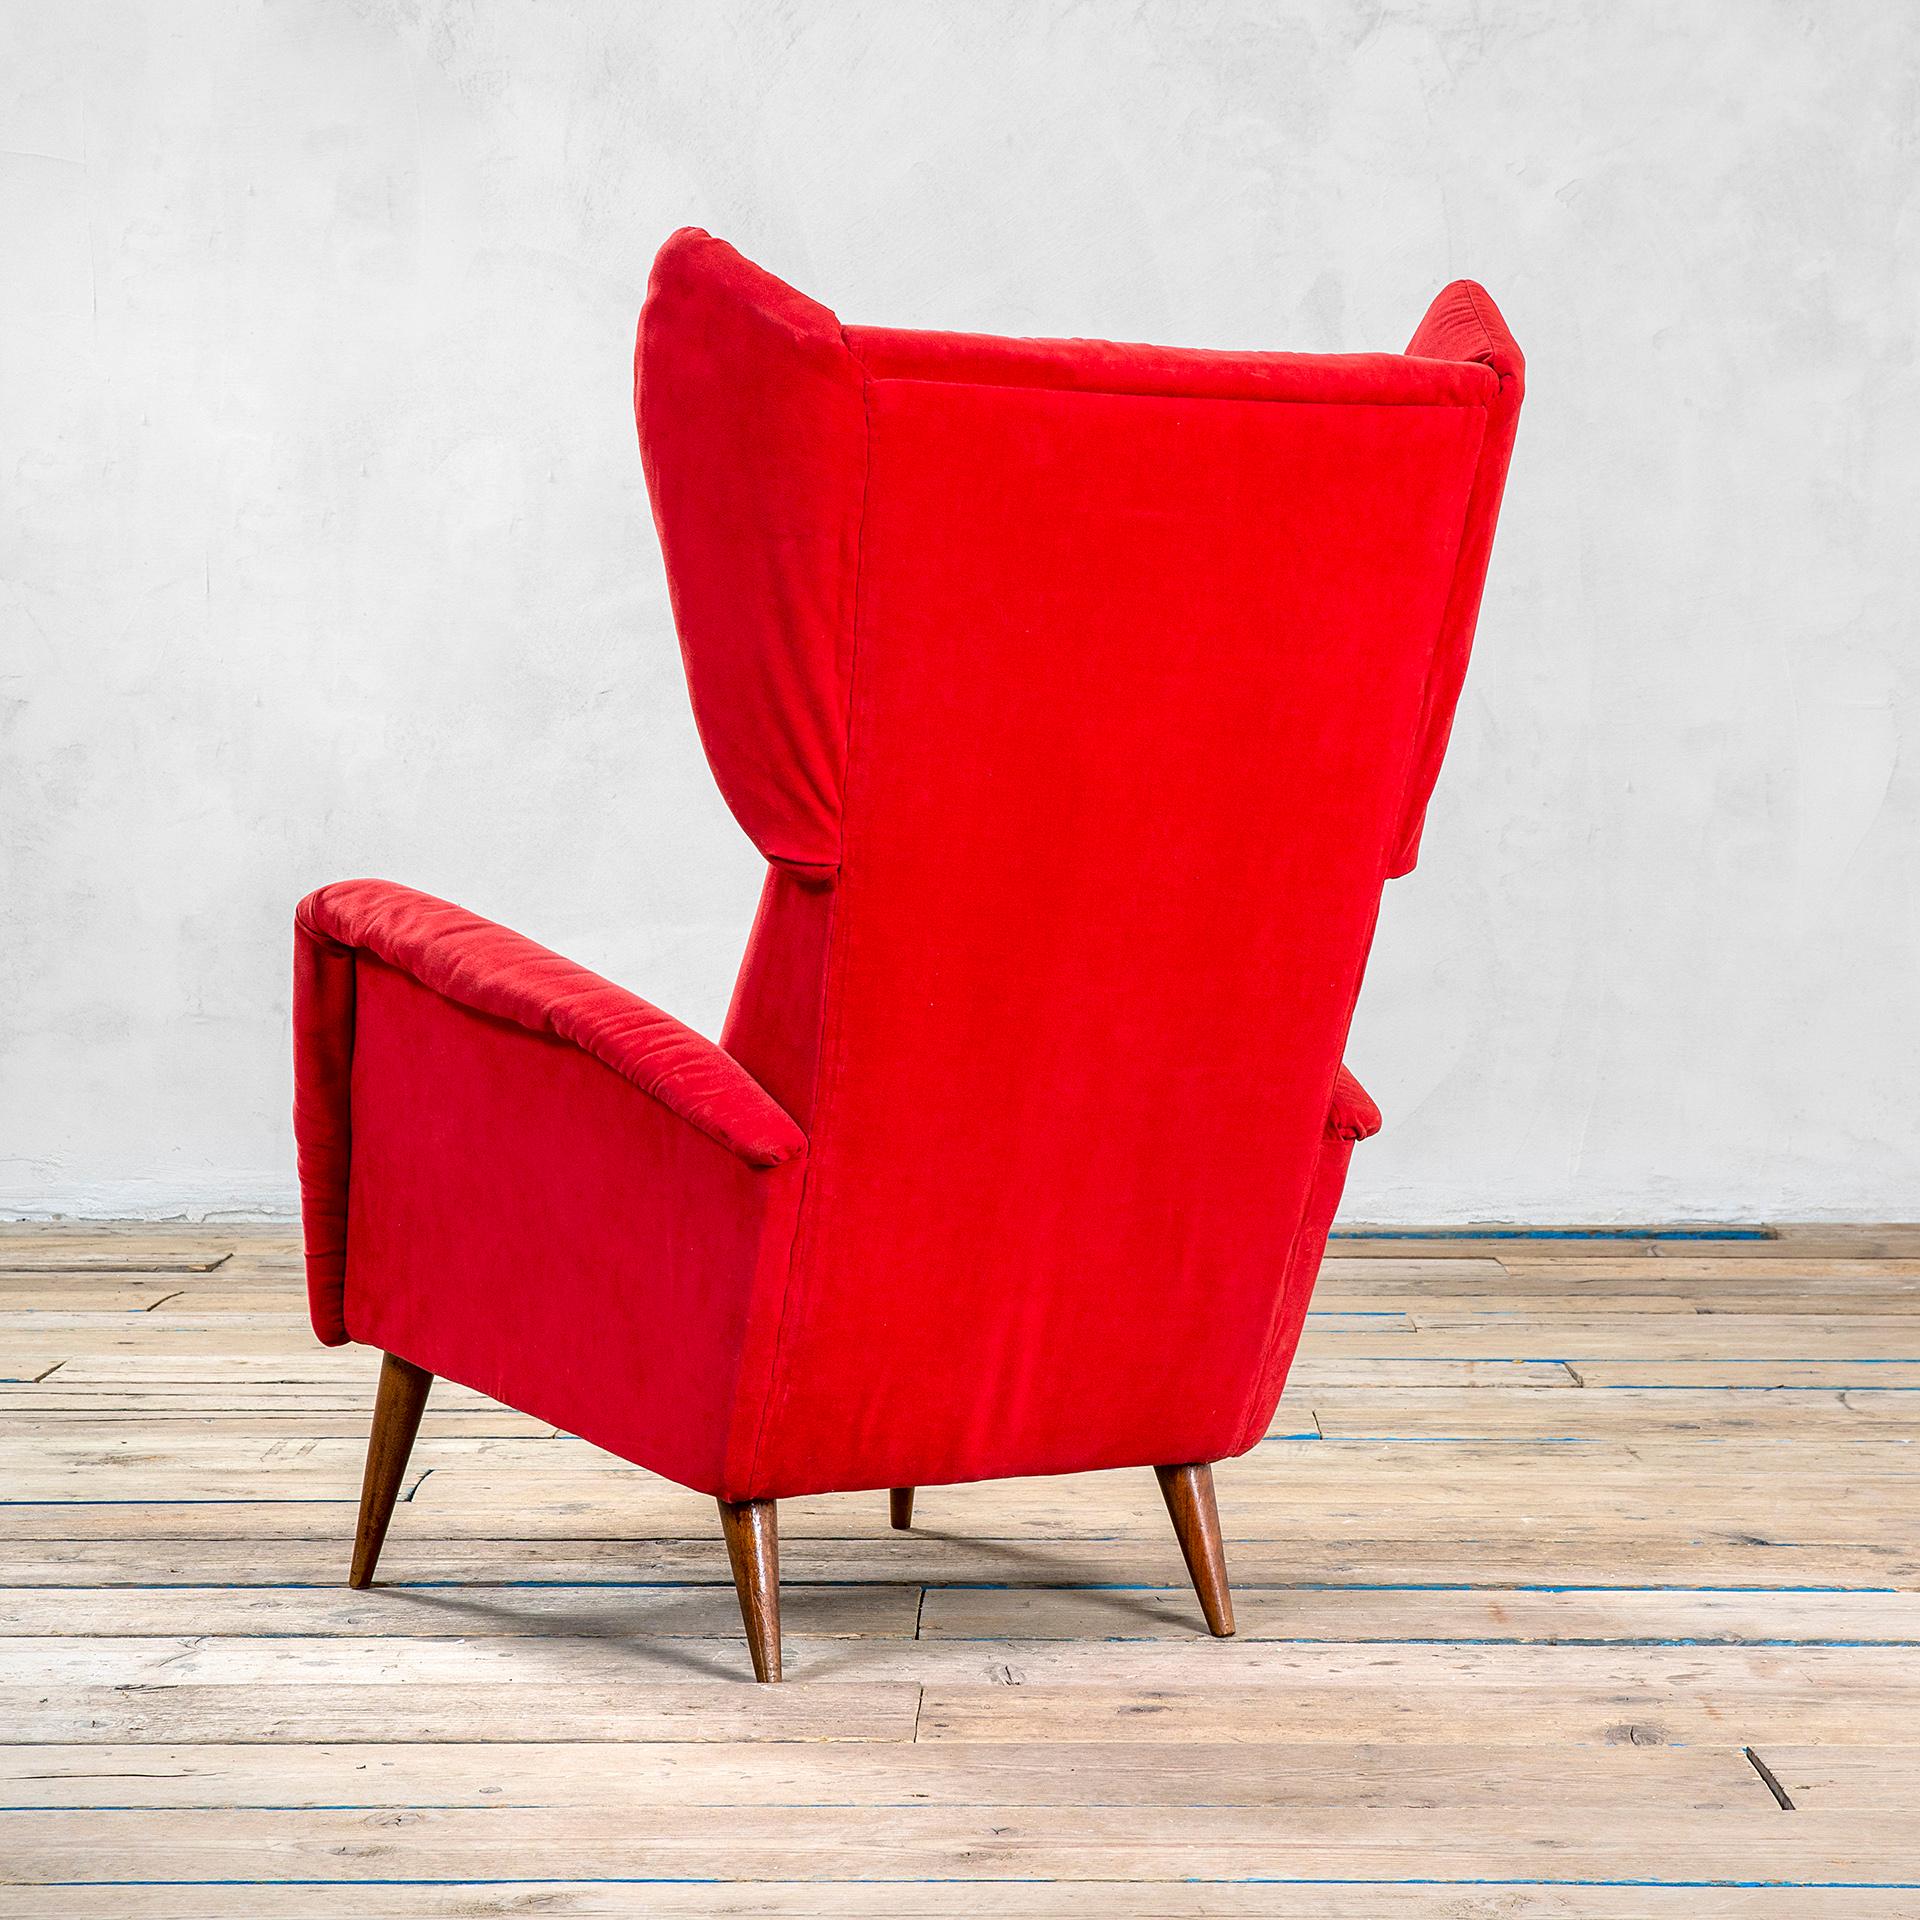 Italian 20th Century Gio Ponti Cassina Single Armchair for Hotel Royal in Naples '50s For Sale